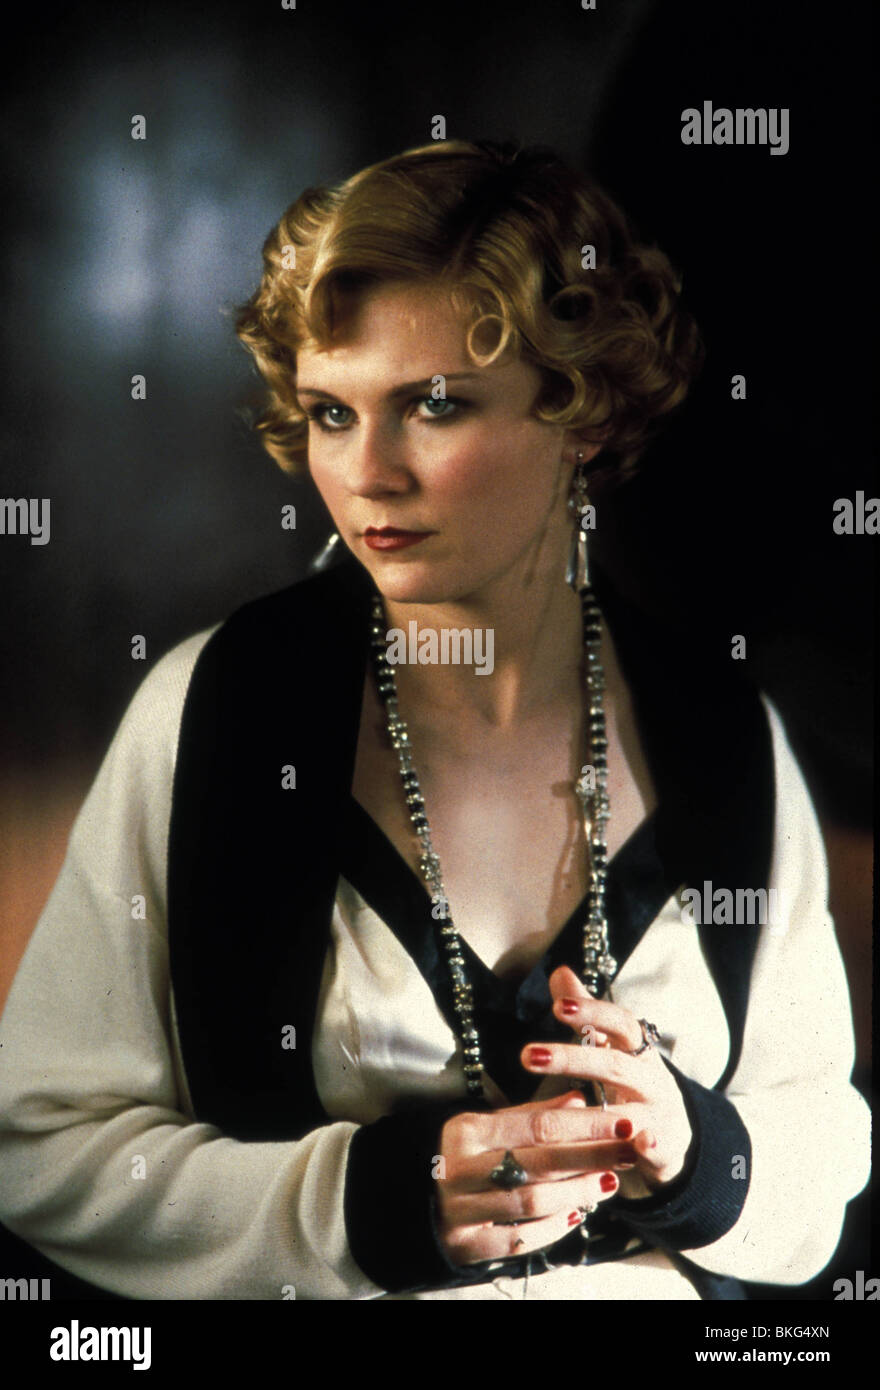 THE CAT'S MEOW (2001) KIRSTEN DUNST CMEO 001-22 Stock Photo